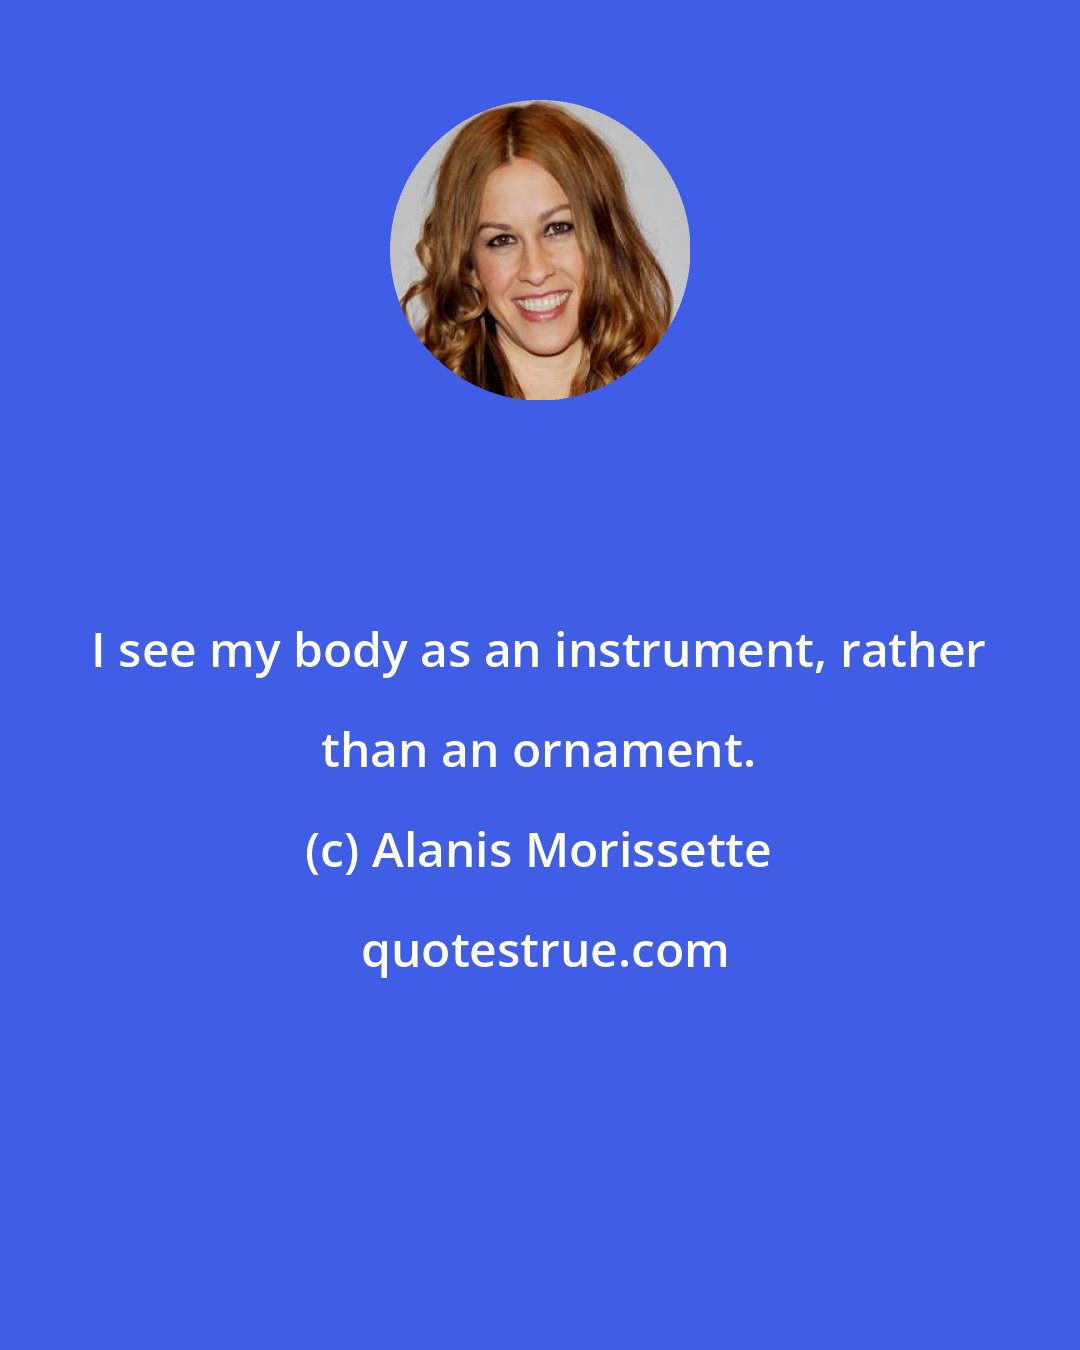 Alanis Morissette: I see my body as an instrument, rather than an ornament.